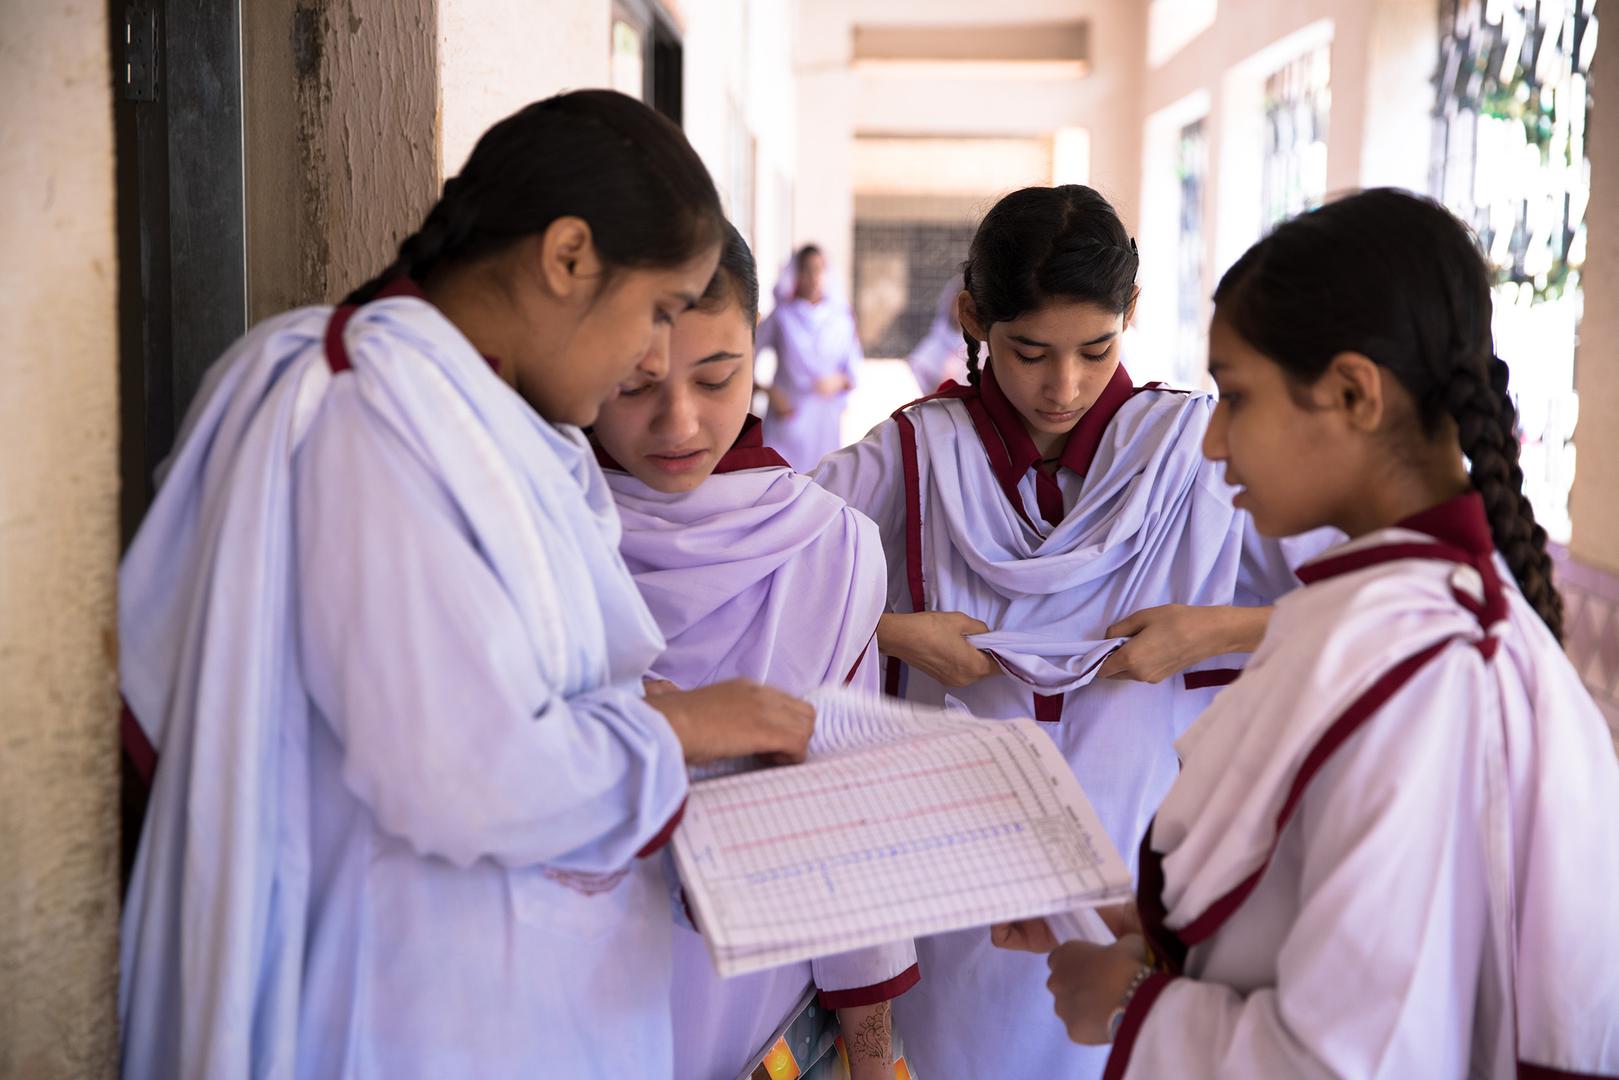 Students check the attendance register at Behar colony government Secondary School for girls in the lyari neighborhood of Karachi, Pakistan.